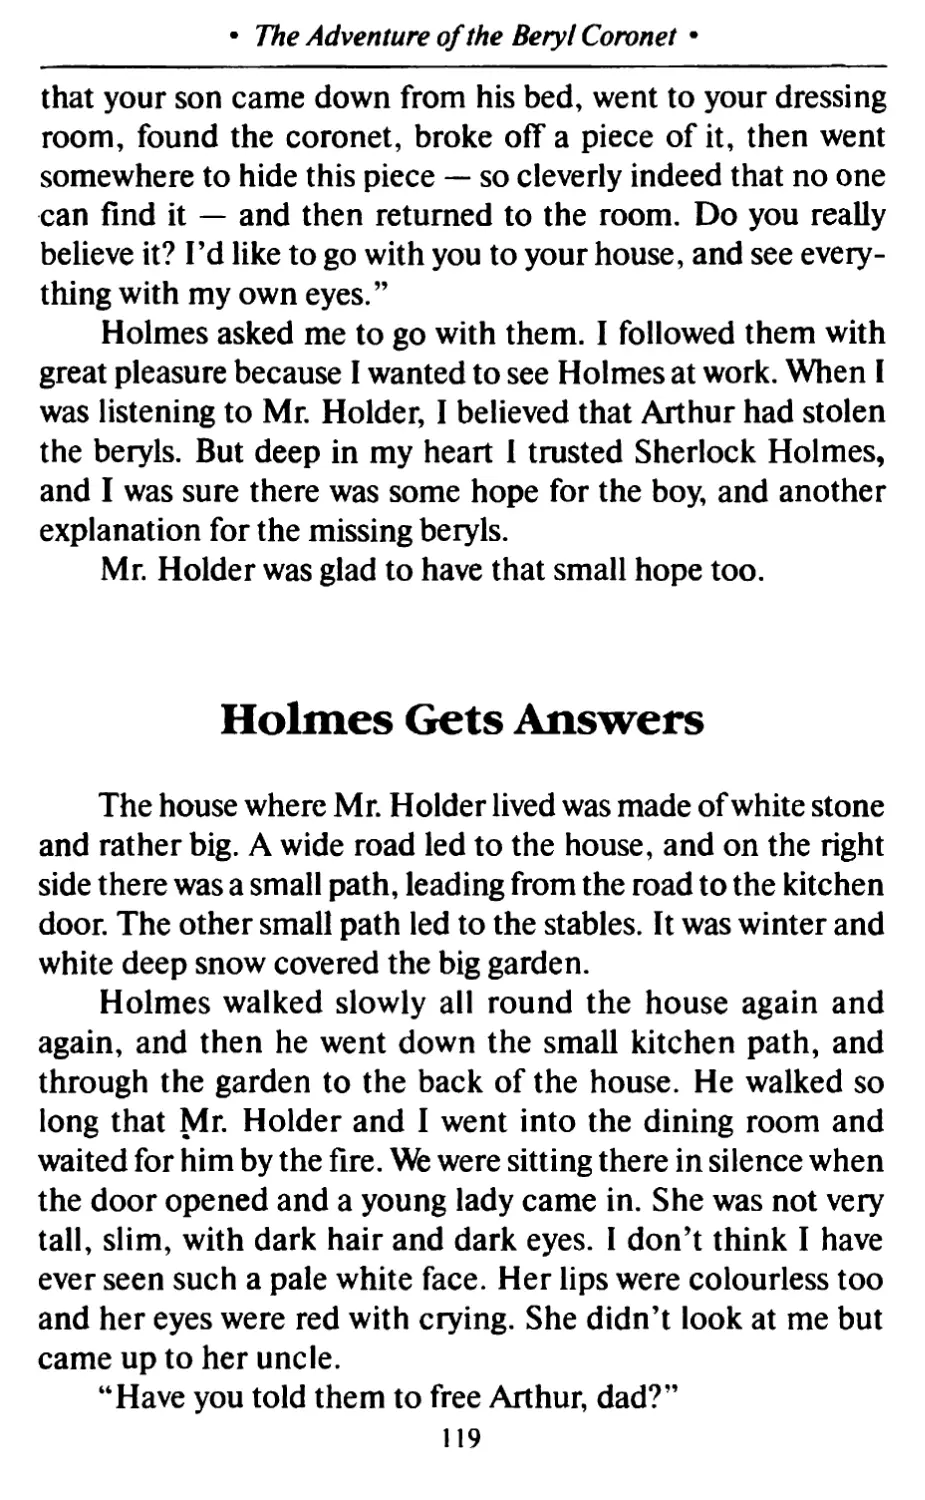 Holmes Gets Answers